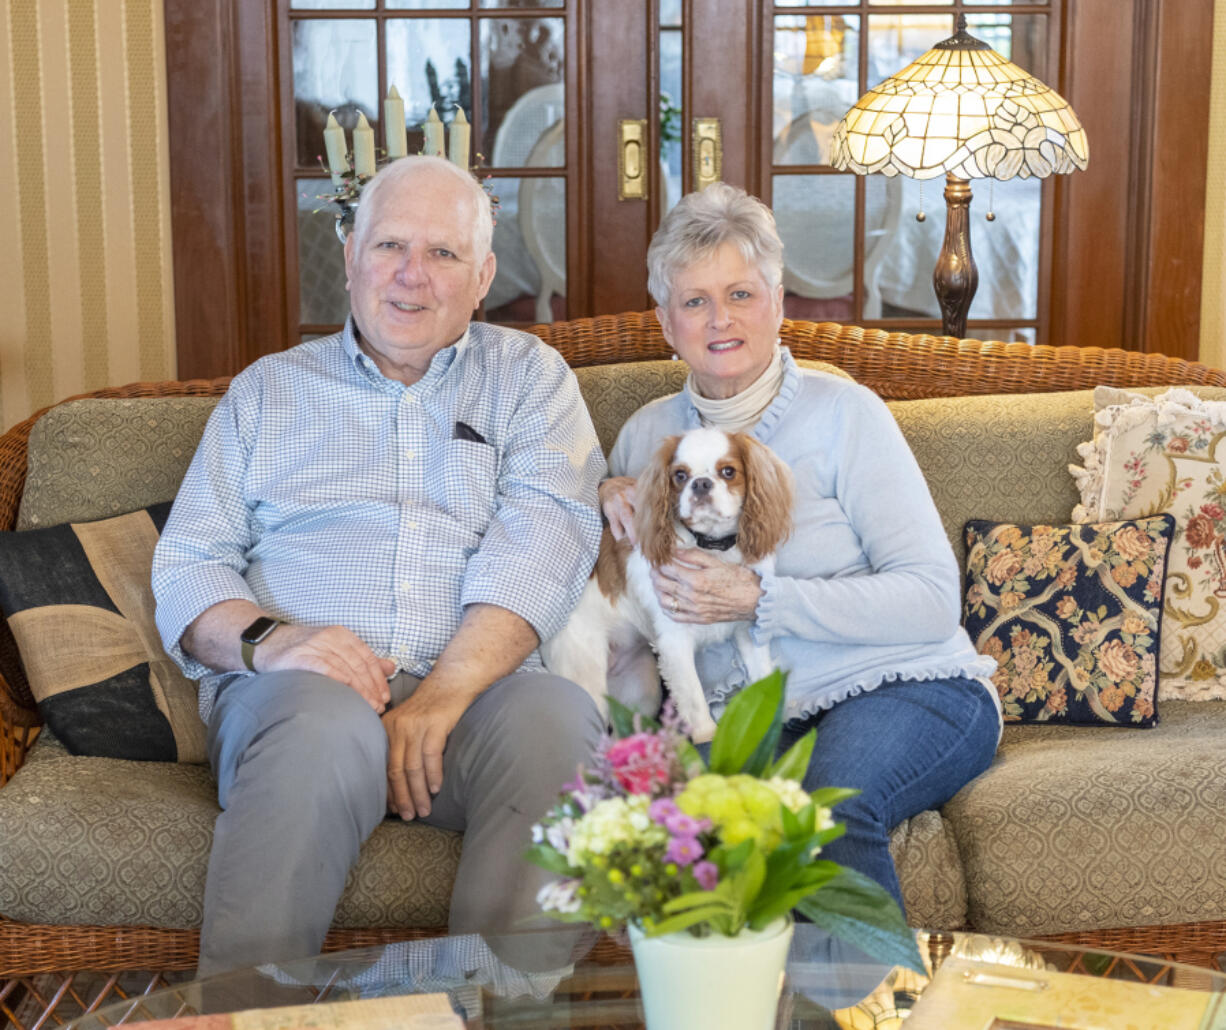 Briar Rose Inn owners Ted, left, and Sallie Reavey sit in their living room with Gracie, their 1-year-old Cavalier King Charles Spaniel, the furry mascot of this downtown Vancouver bed-and-breakfast.